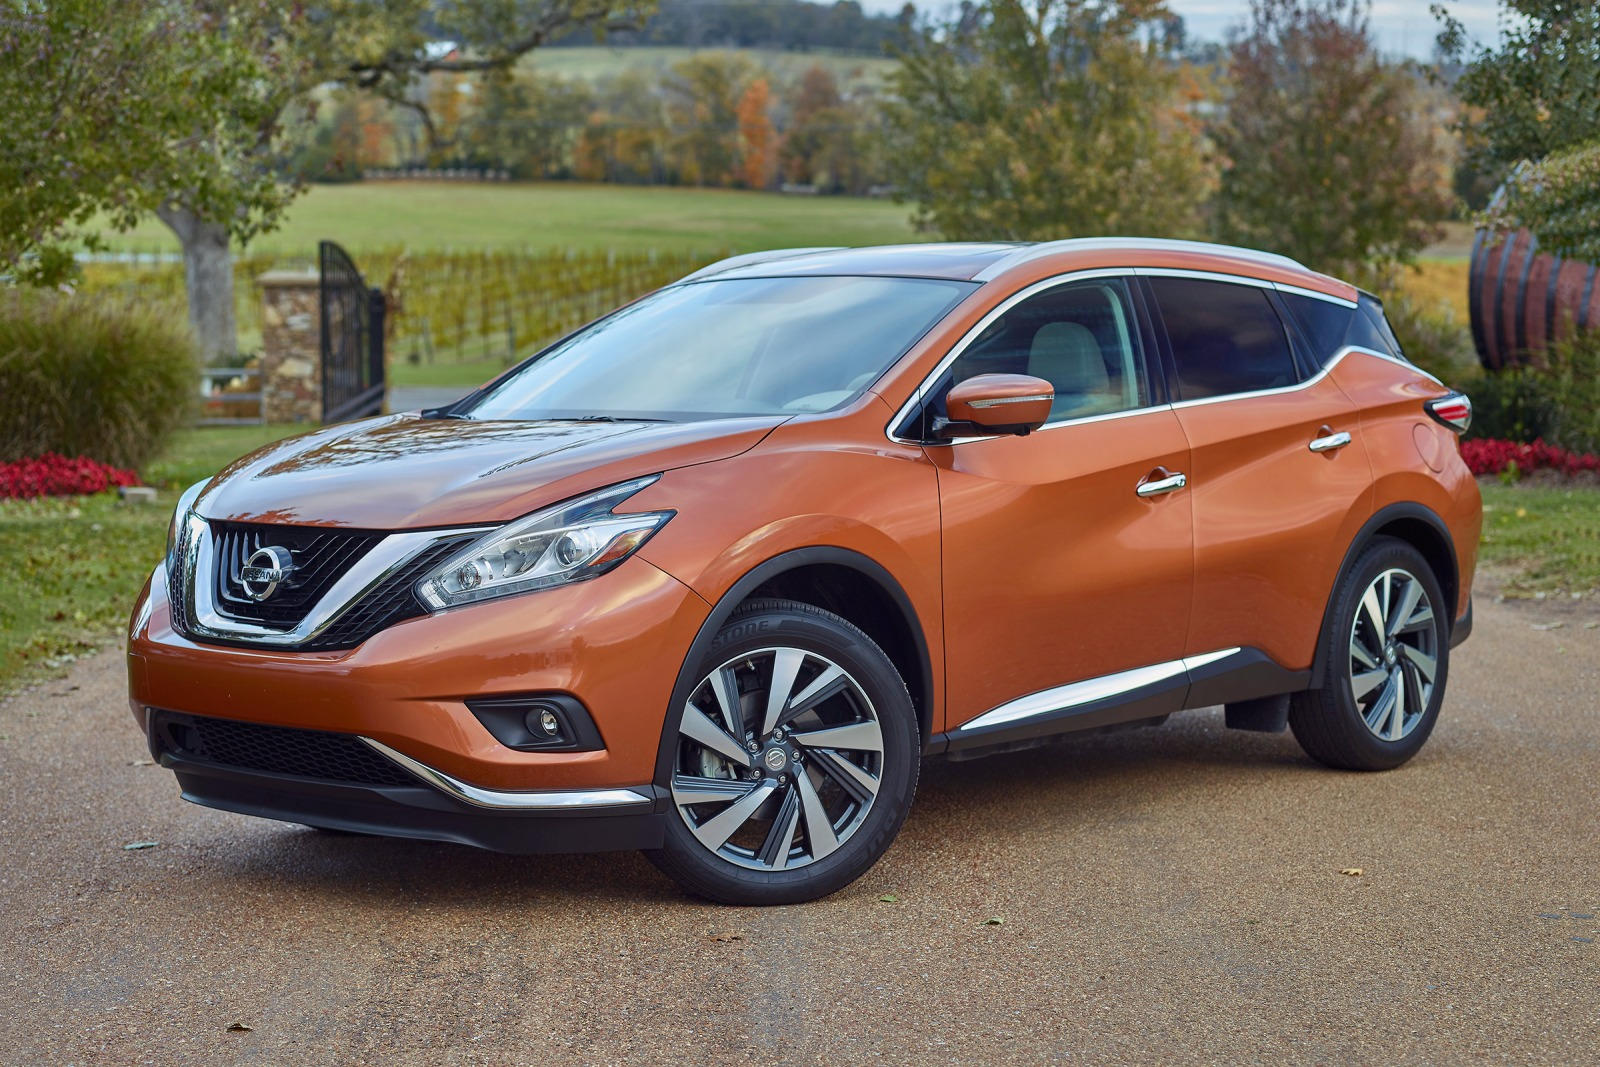 2018 Nissan Murano Review, Pricing | Murano SUV Models | CarBuzz